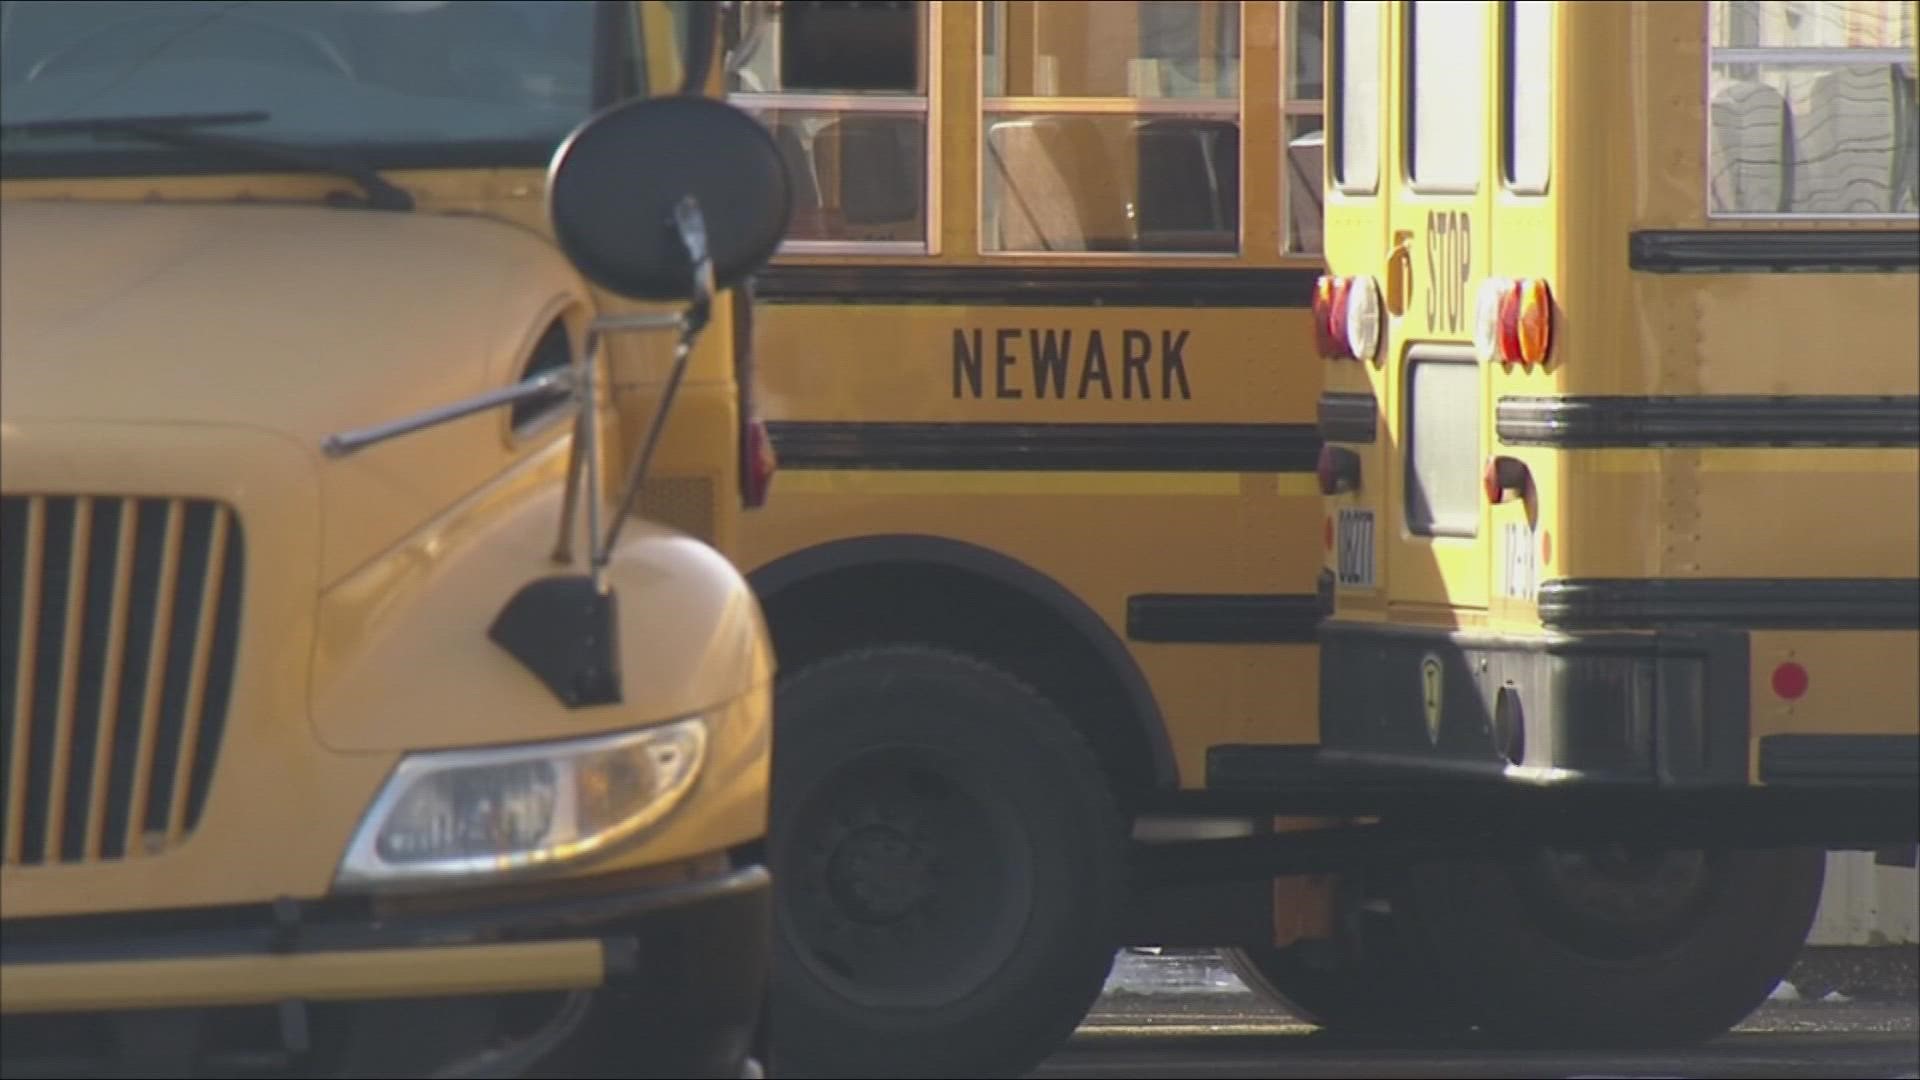 The district said the child was asleep on the bus for about four minutes between the time the driver stepped off the bus and the mother boarded to pick up the child.